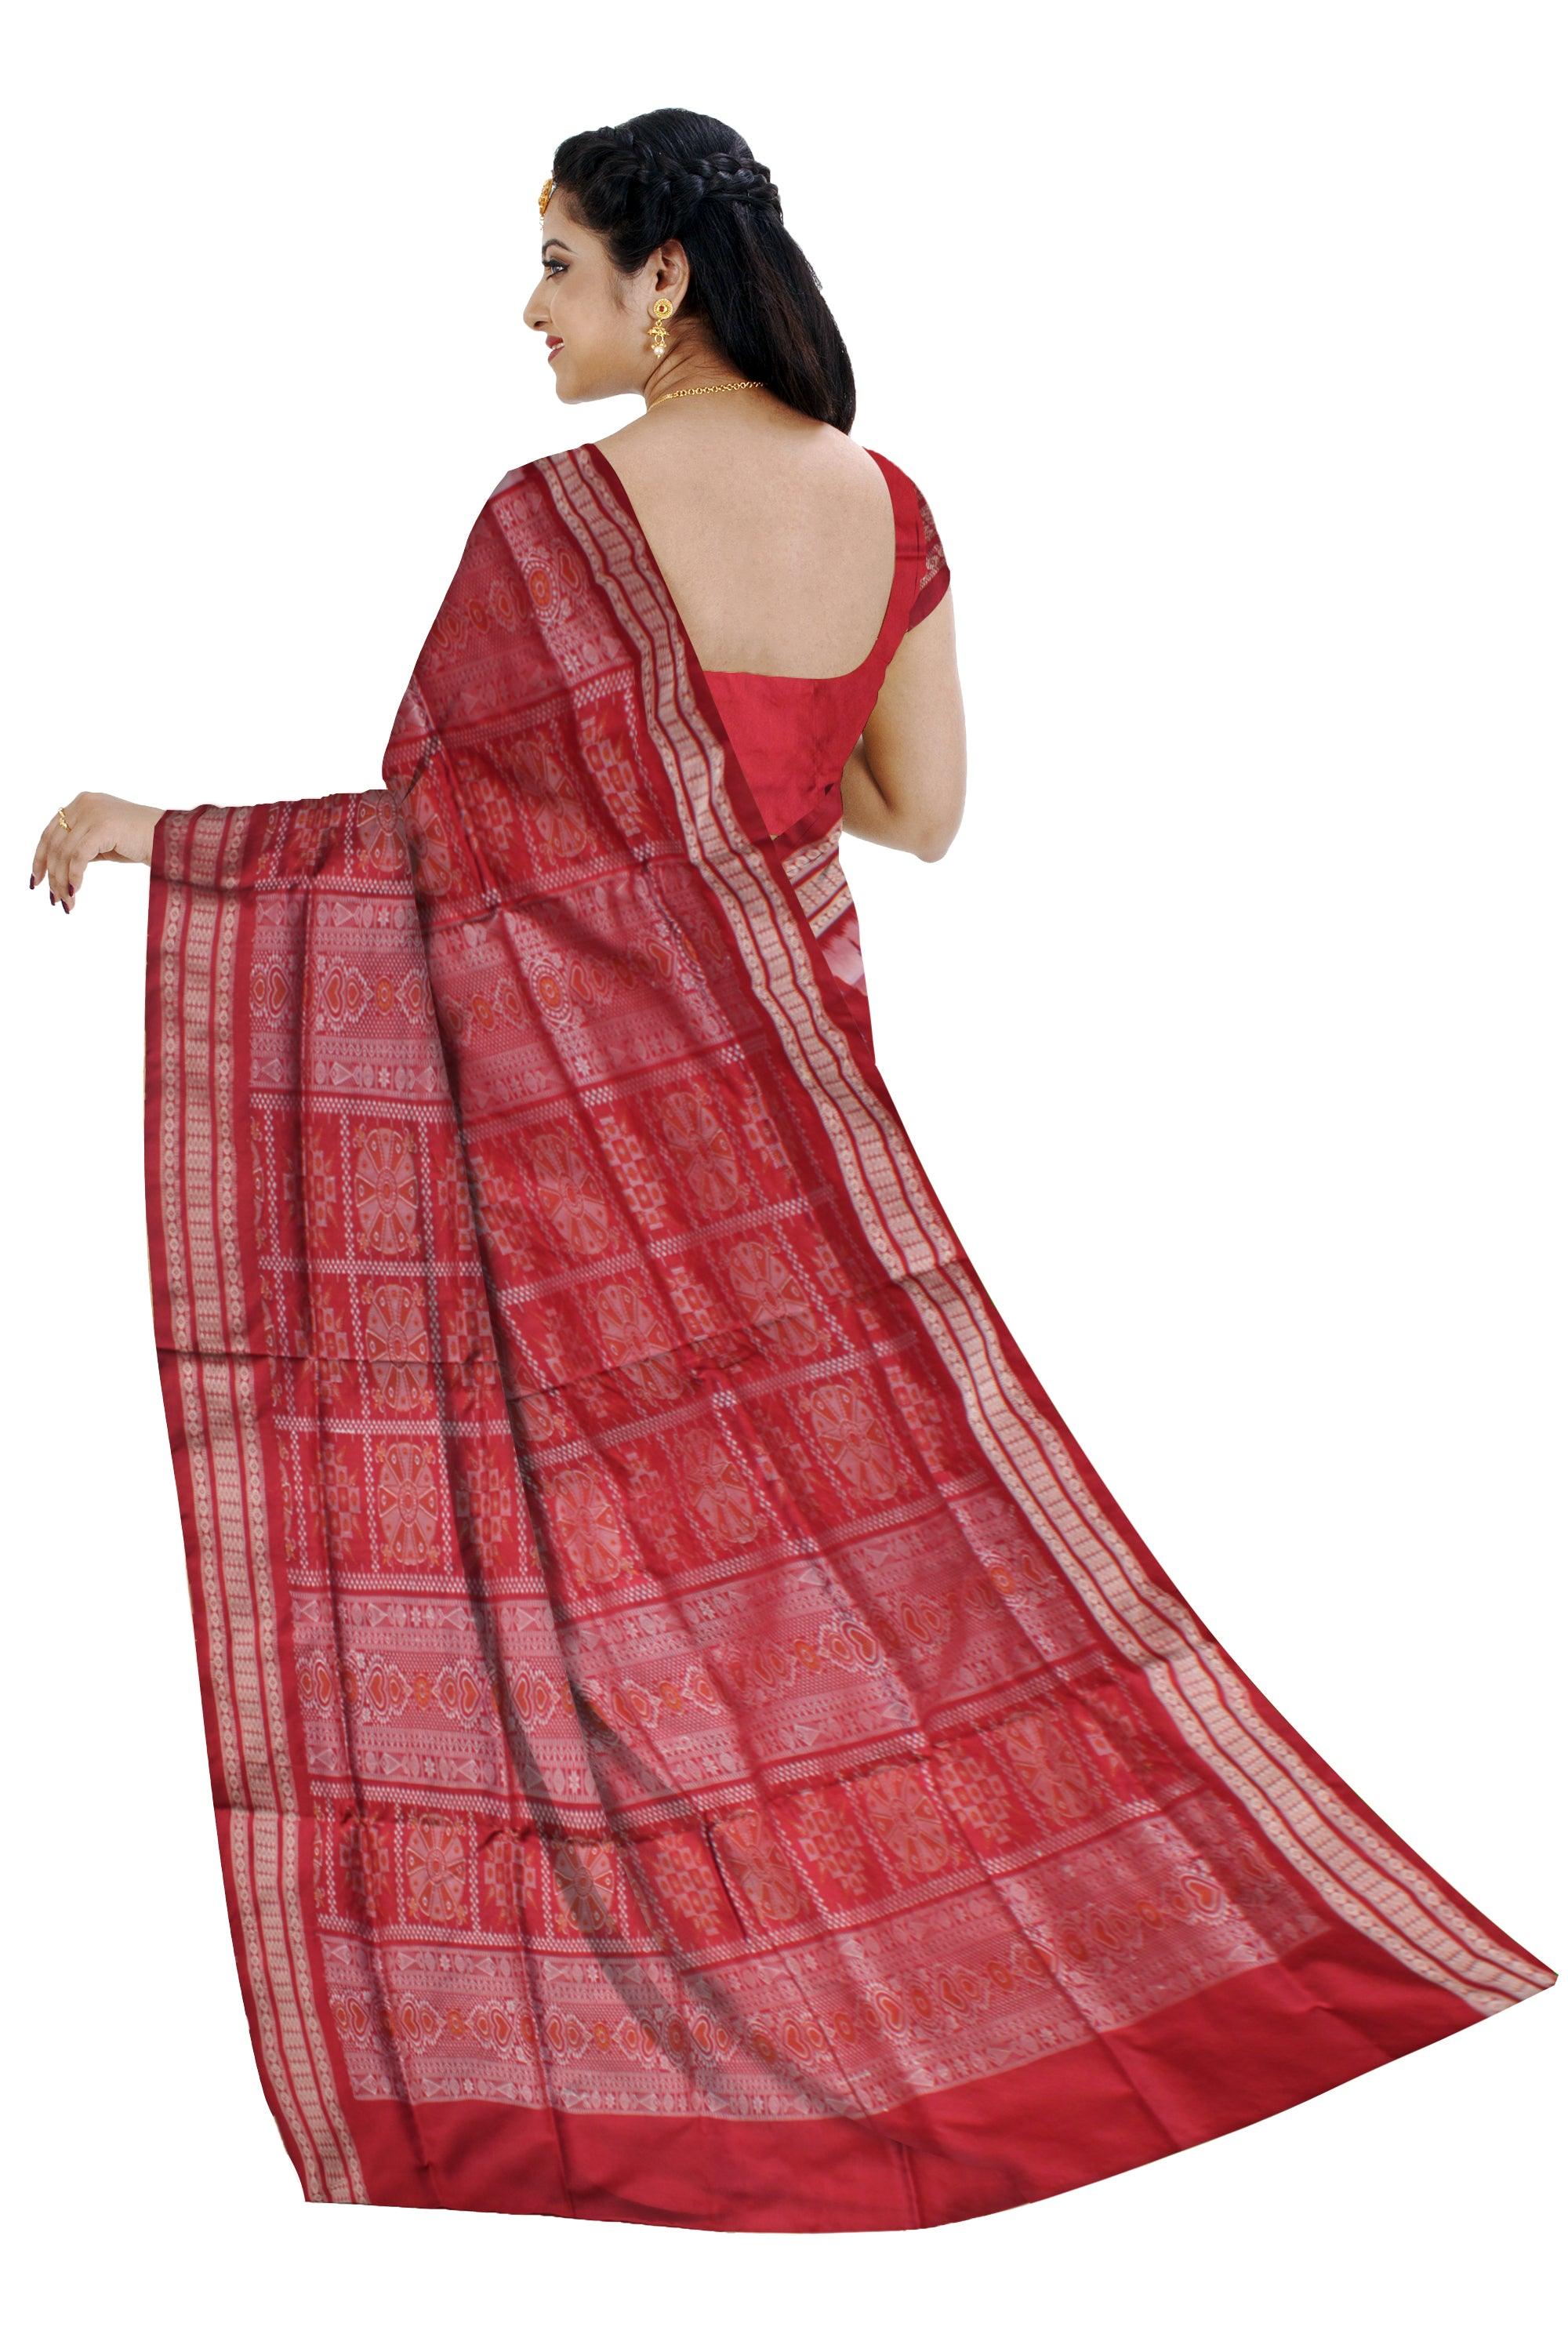 IKAT PATTERN PATA SAREE IS RED AND SILVER COLOR BASE, ATTACHED WITH MATCHING BLOUSE PIECE. - Koshali Arts & Crafts Enterprise